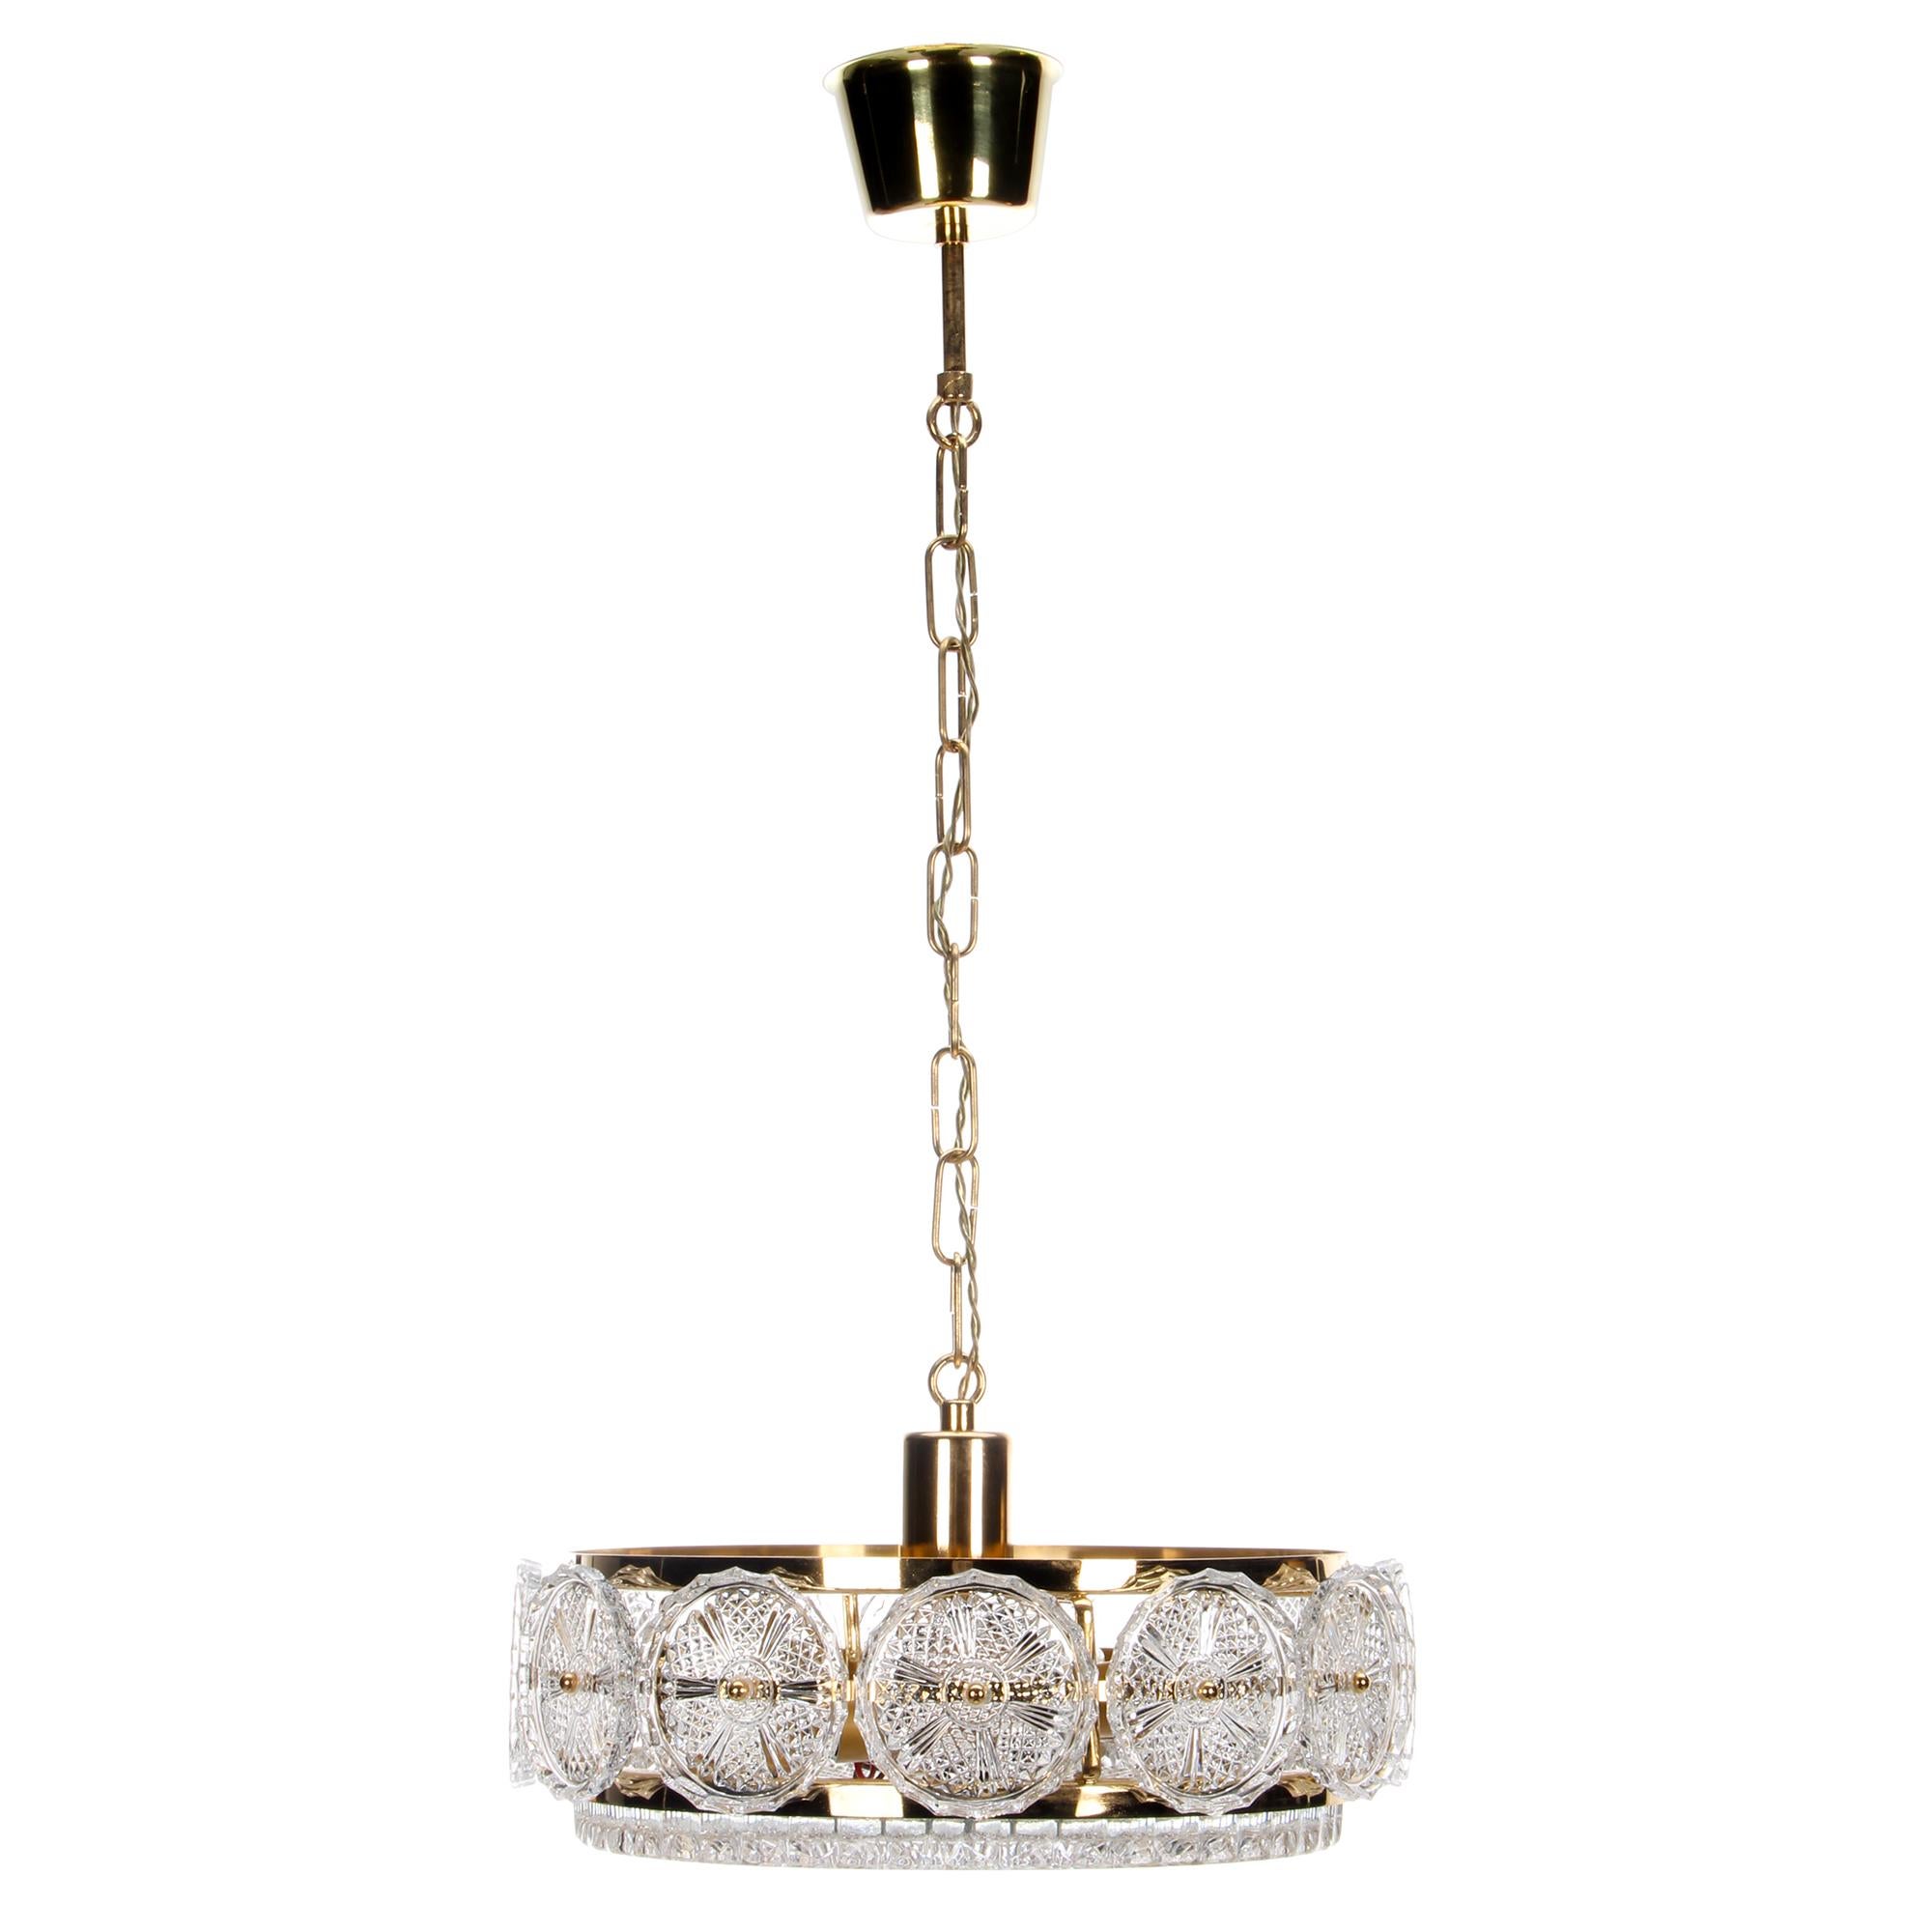 Prism pendant - produced by Vitrika in the 1960s - gorgeous Hollywood Regency style crystal glass hanging light with gold plate, in very good vintage condition.

A beautiful crystal pendant, comprised of 12 round clear crystal glass pieces,